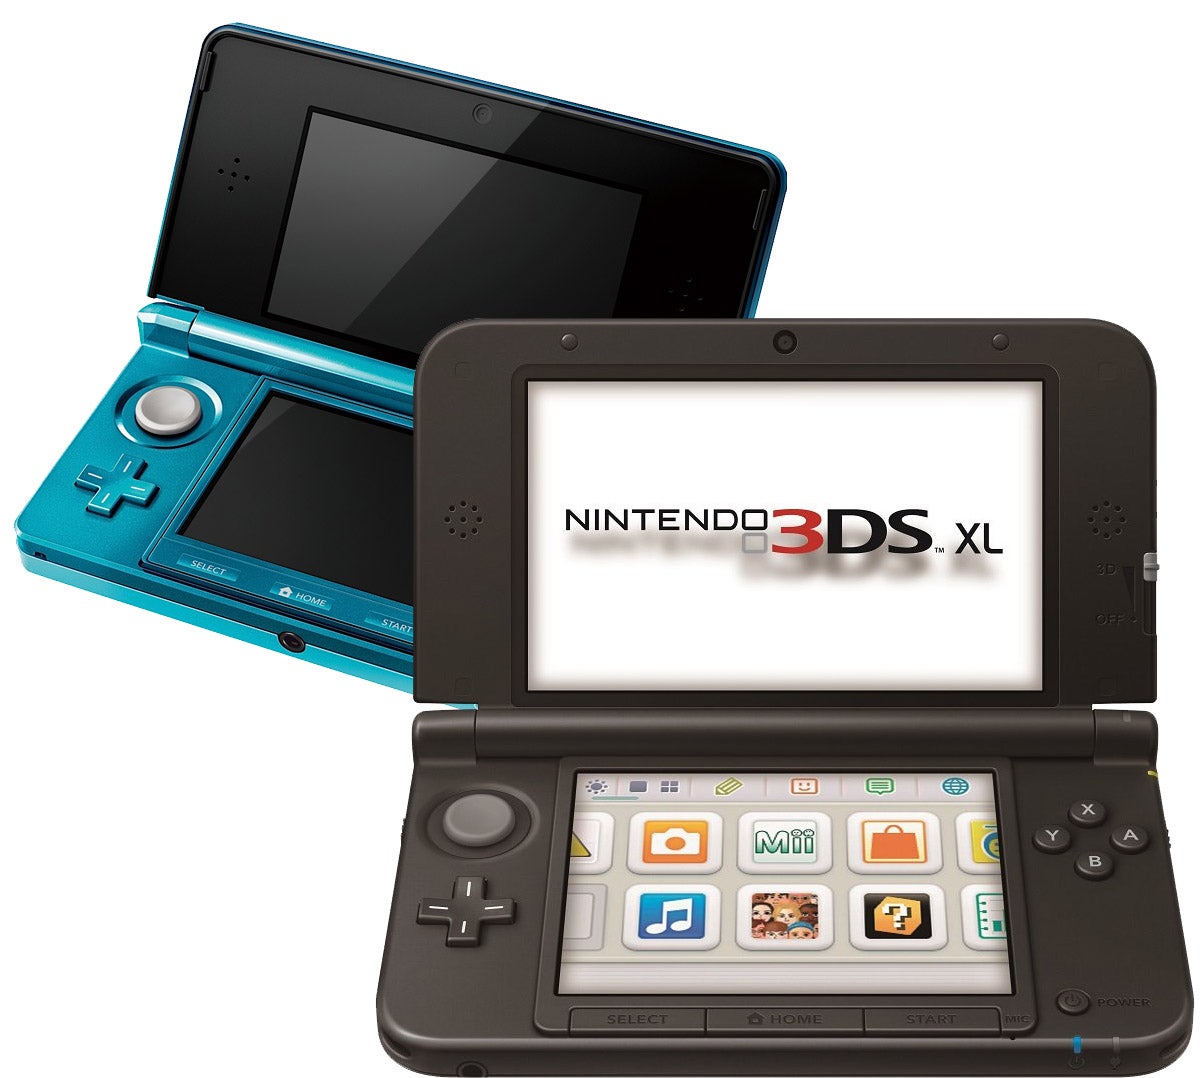 Nintendo CEO Says 3DS Isn't Dead As Focus Shifts to Switch | VG247